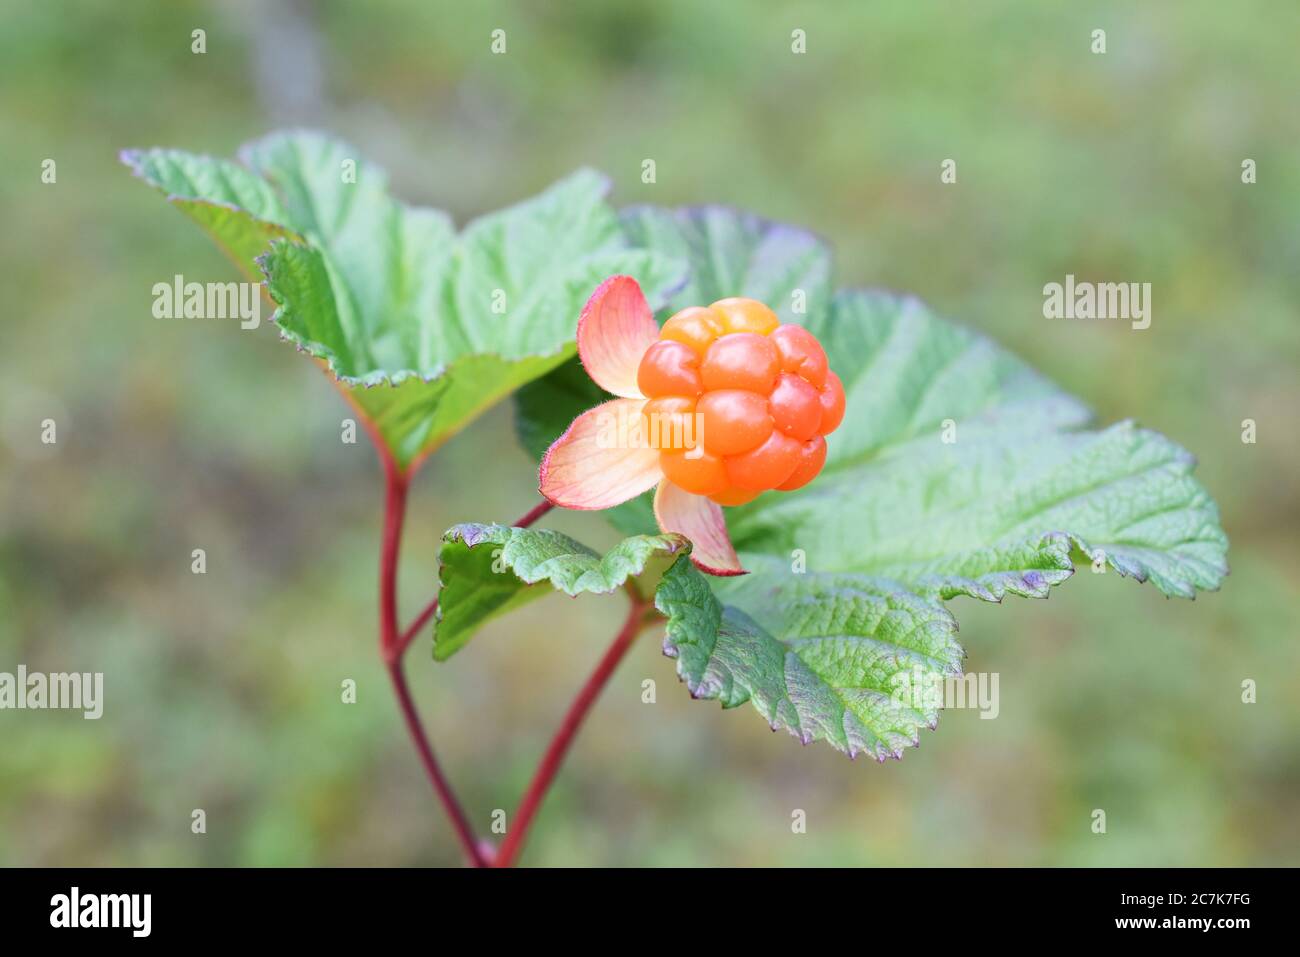 Cloudberry plant with orange colored ripe fruit growing in a forest Stock Photo